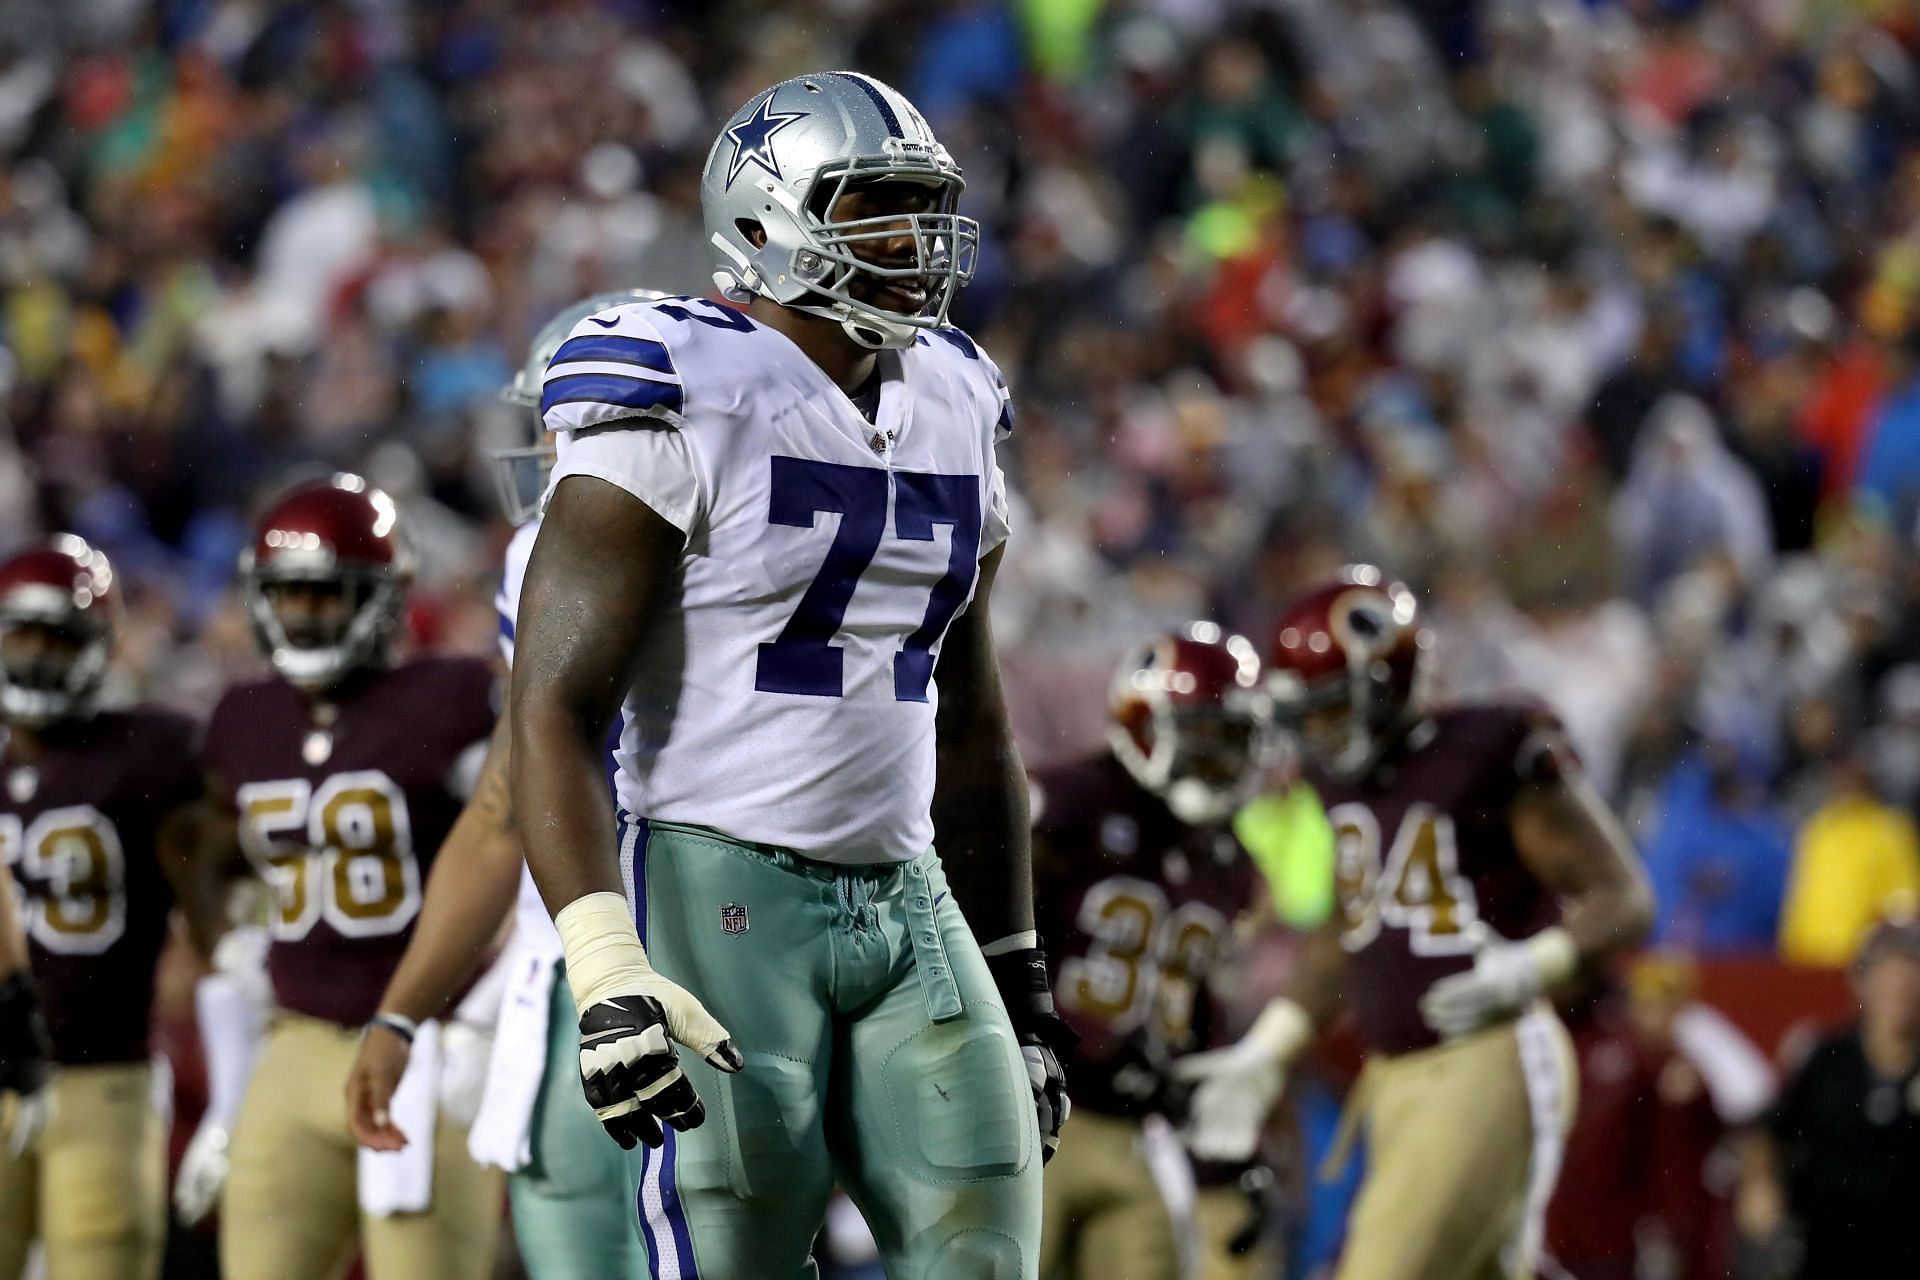 Tyron Smith may be past his prime